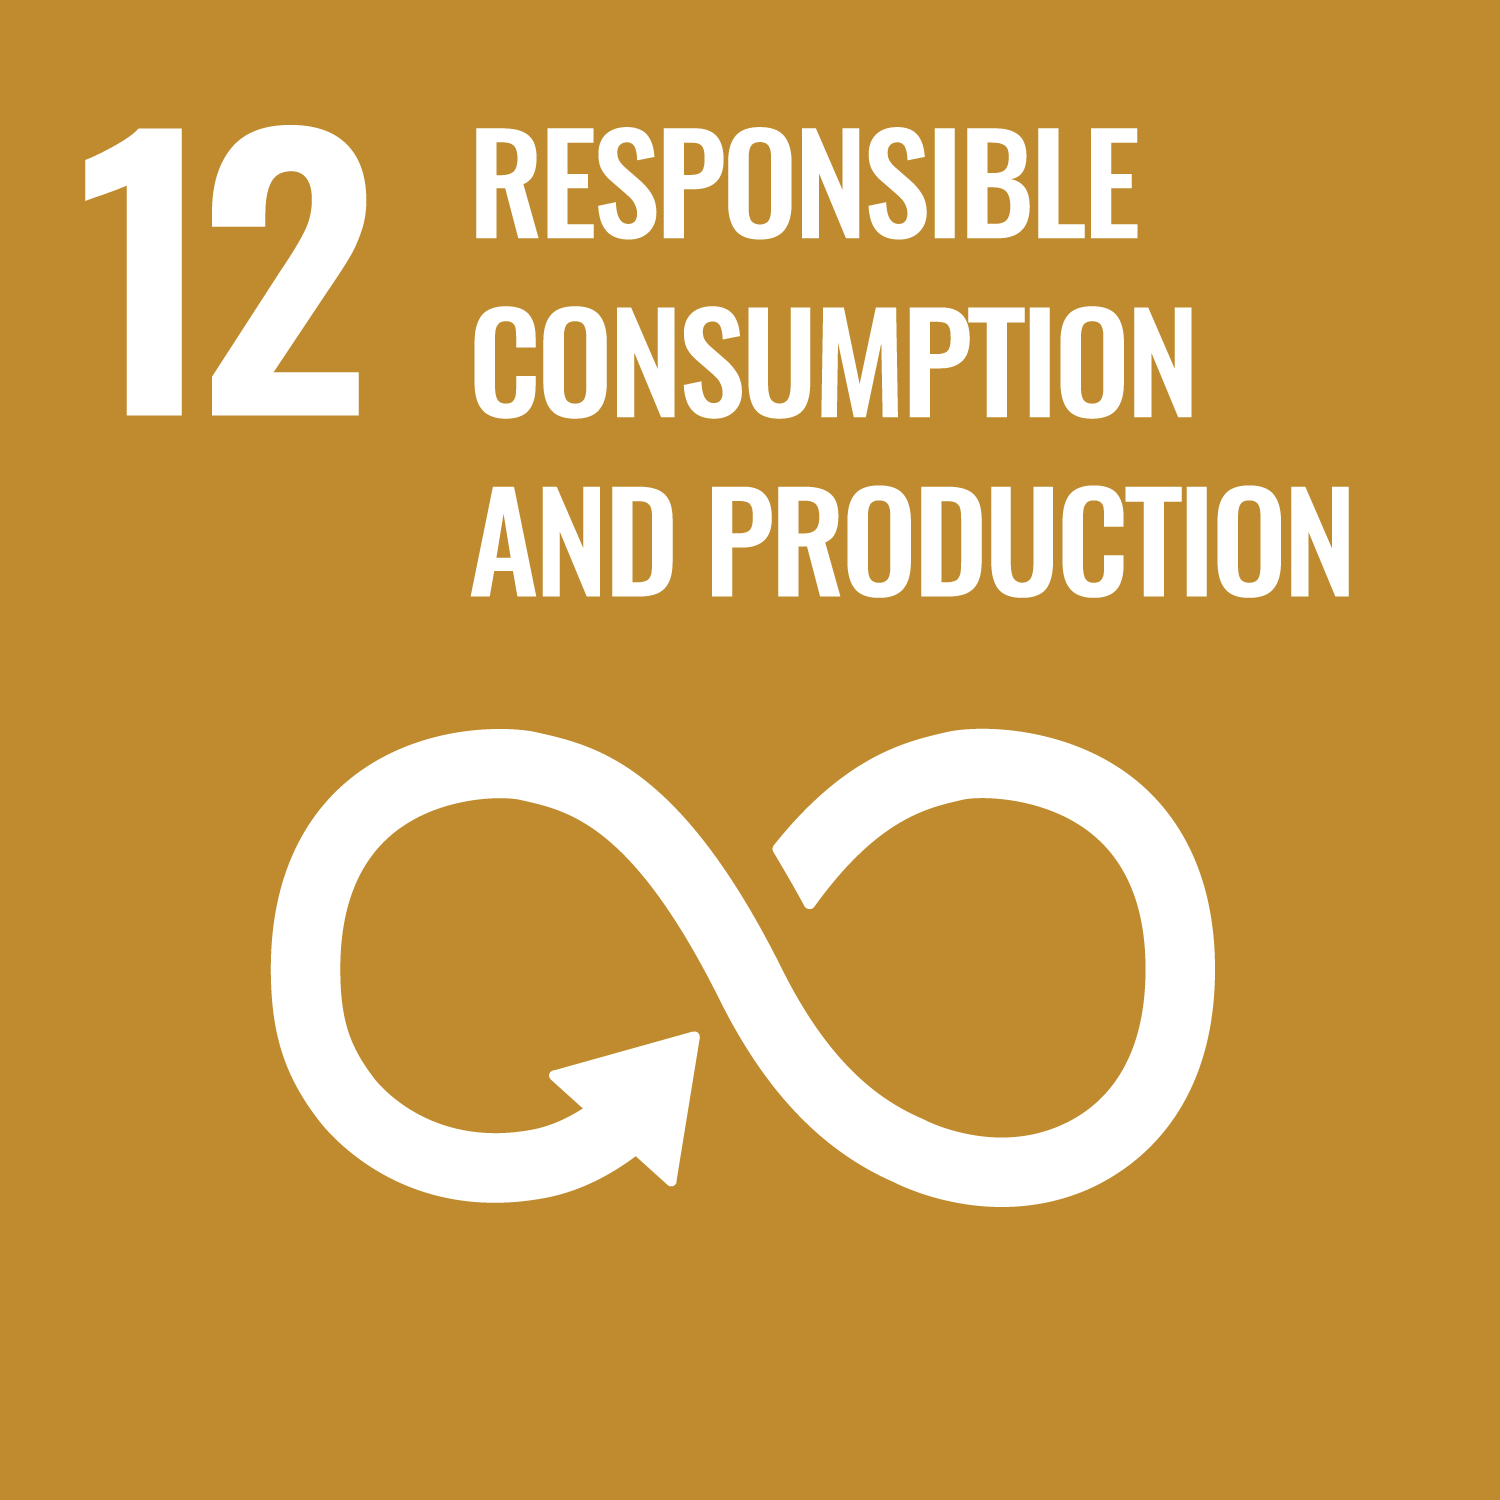 ［Goal 12］ Responsible Consumption and Production